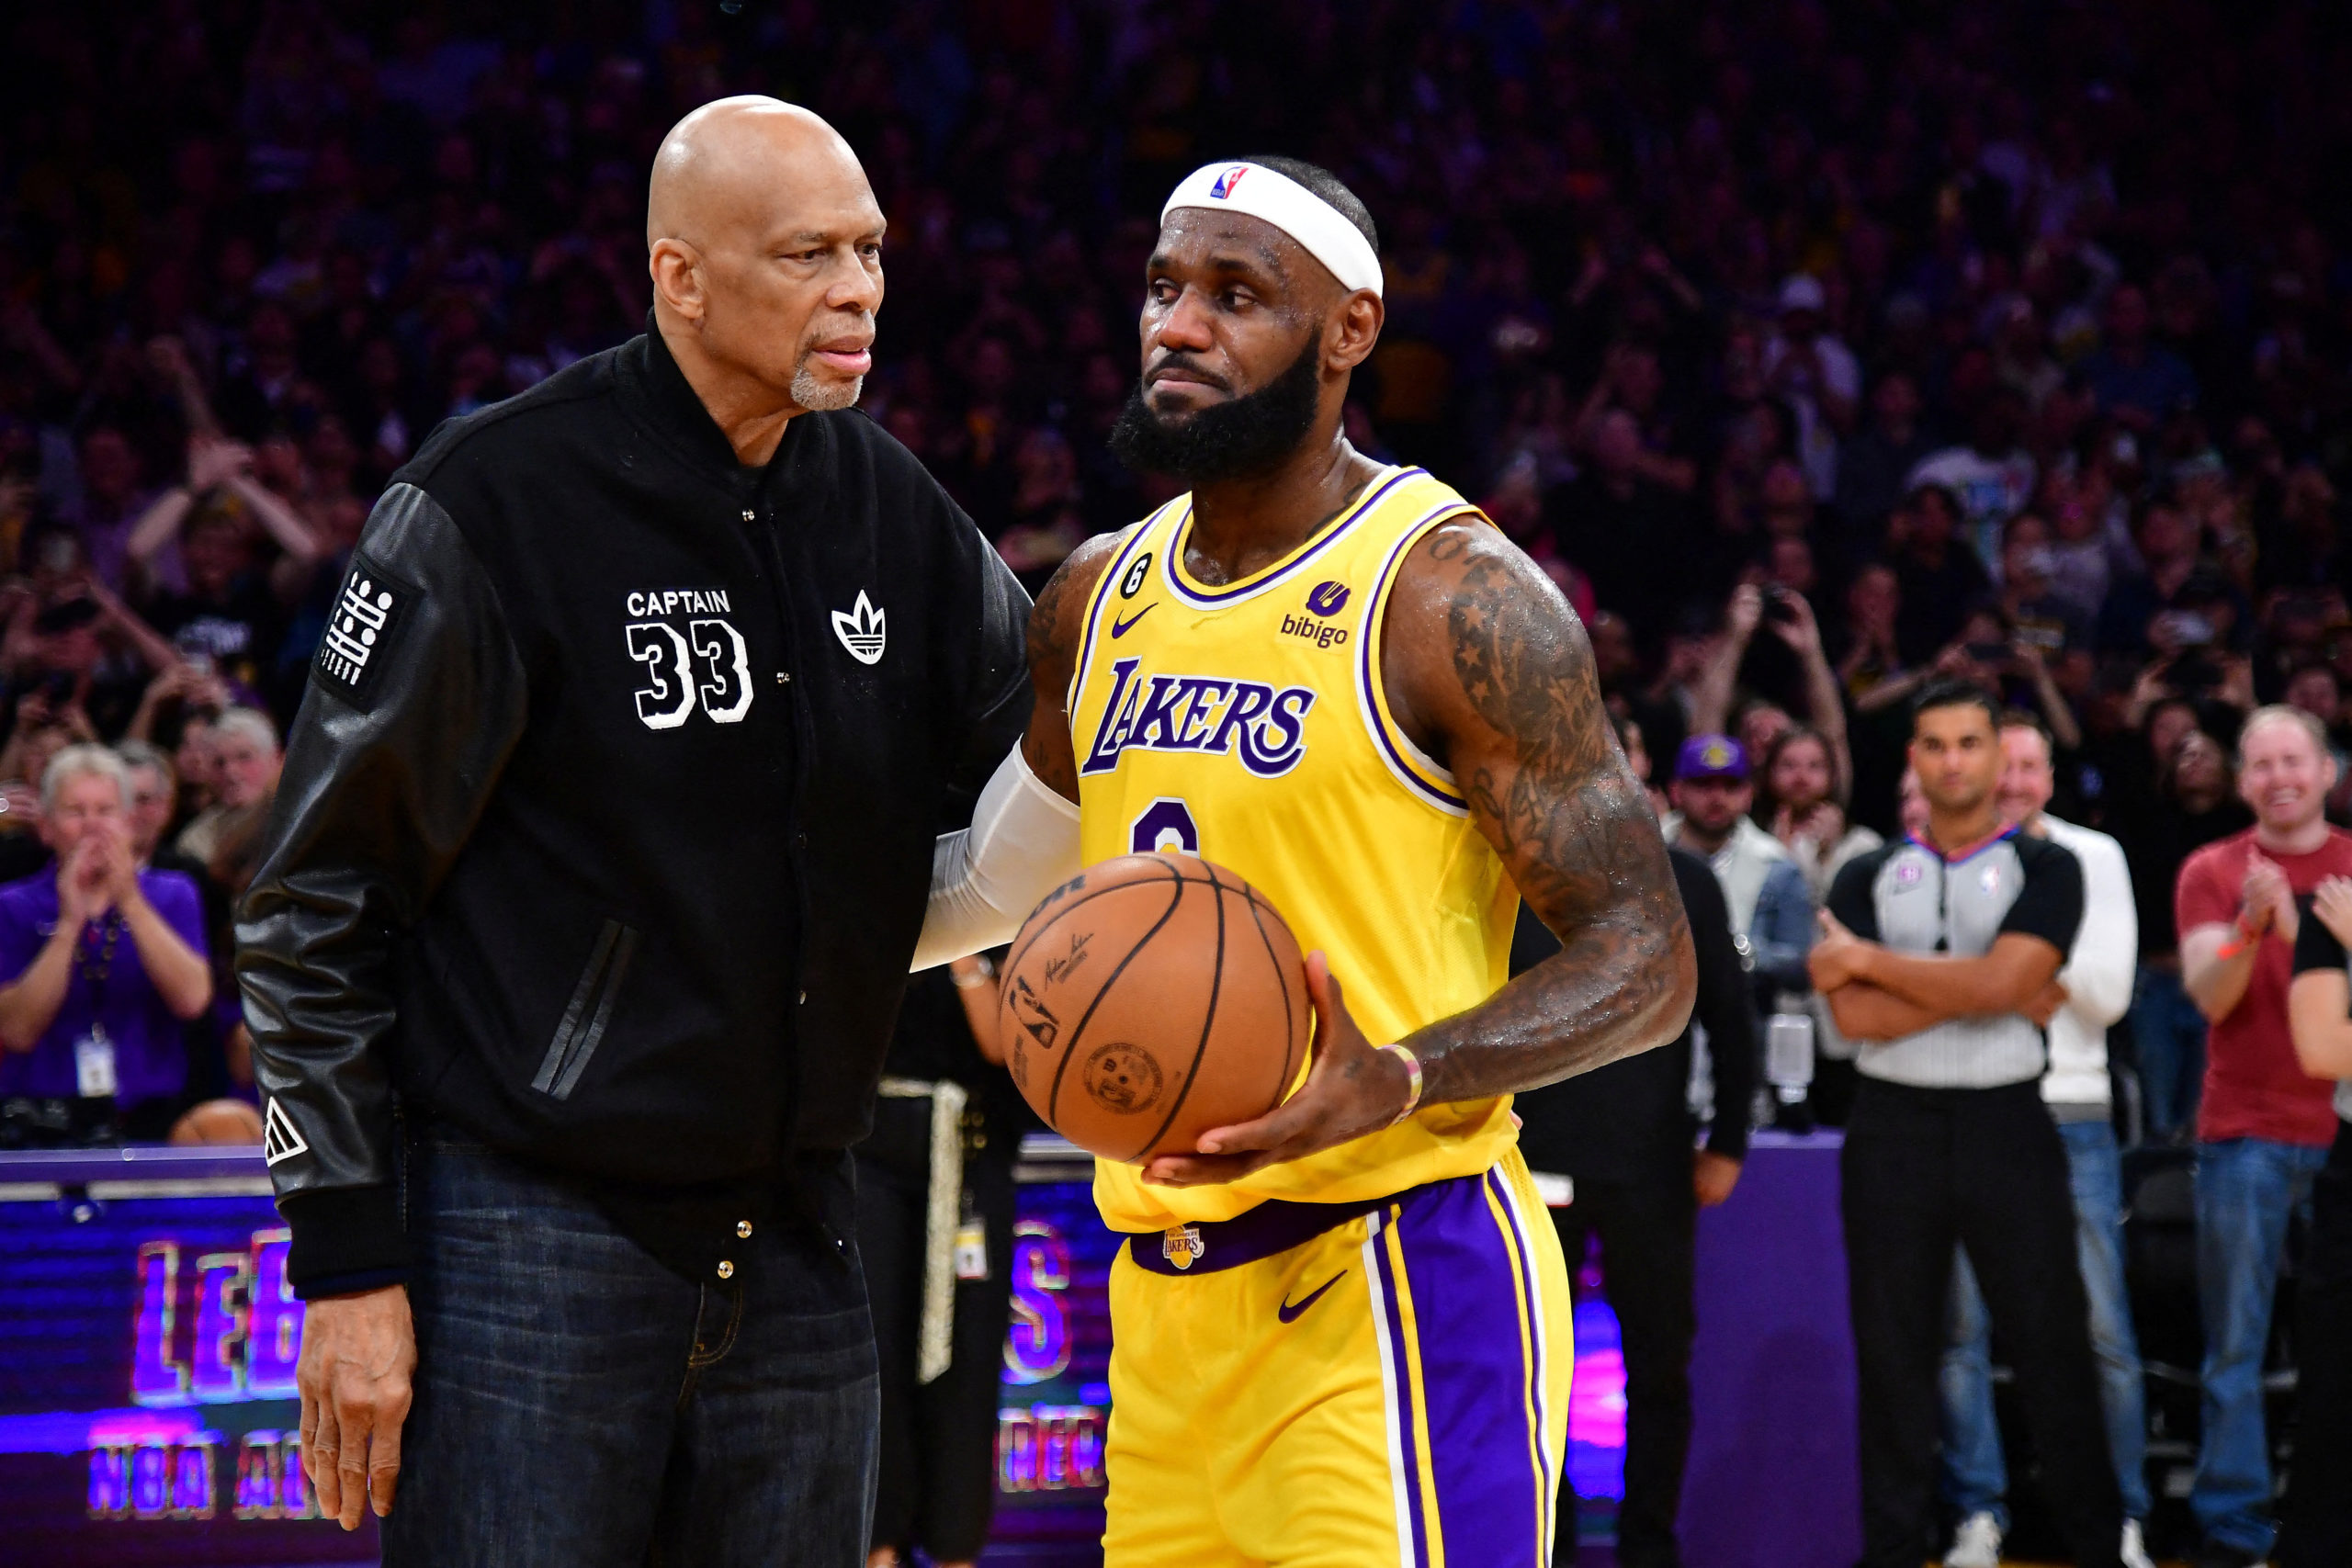 FILE PHOTO: Feb 7, 2023; Los Angeles, California, USA; Los Angeles Lakers forward LeBron James (6) meets with former player Kareem Abdul-Jabbar after breaking the NBA all time scoring record against the Oklahoma City Thunder during the second half at Crypto.com Arena. 